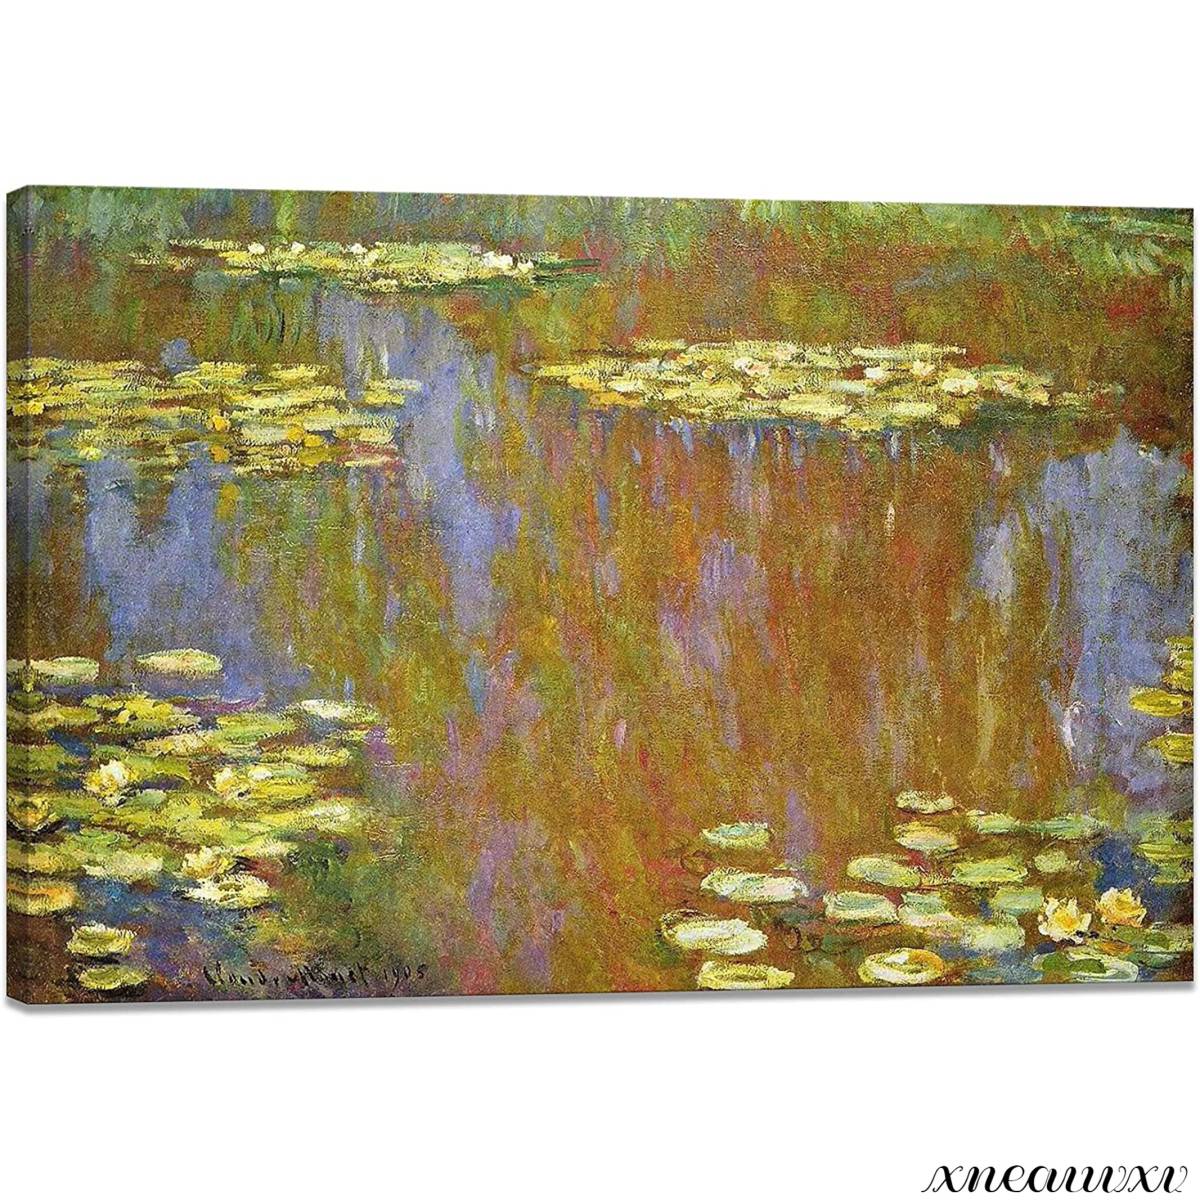 Monet's Water Lilies Art Panel Large Size Reproduction Oil Painting Landscape Painting Interior Wall Hanging Room Decoration Decorative Painting Canvas Painting Art Art Appreciation Fine Art, Painting, Oil painting, Nature, Landscape painting